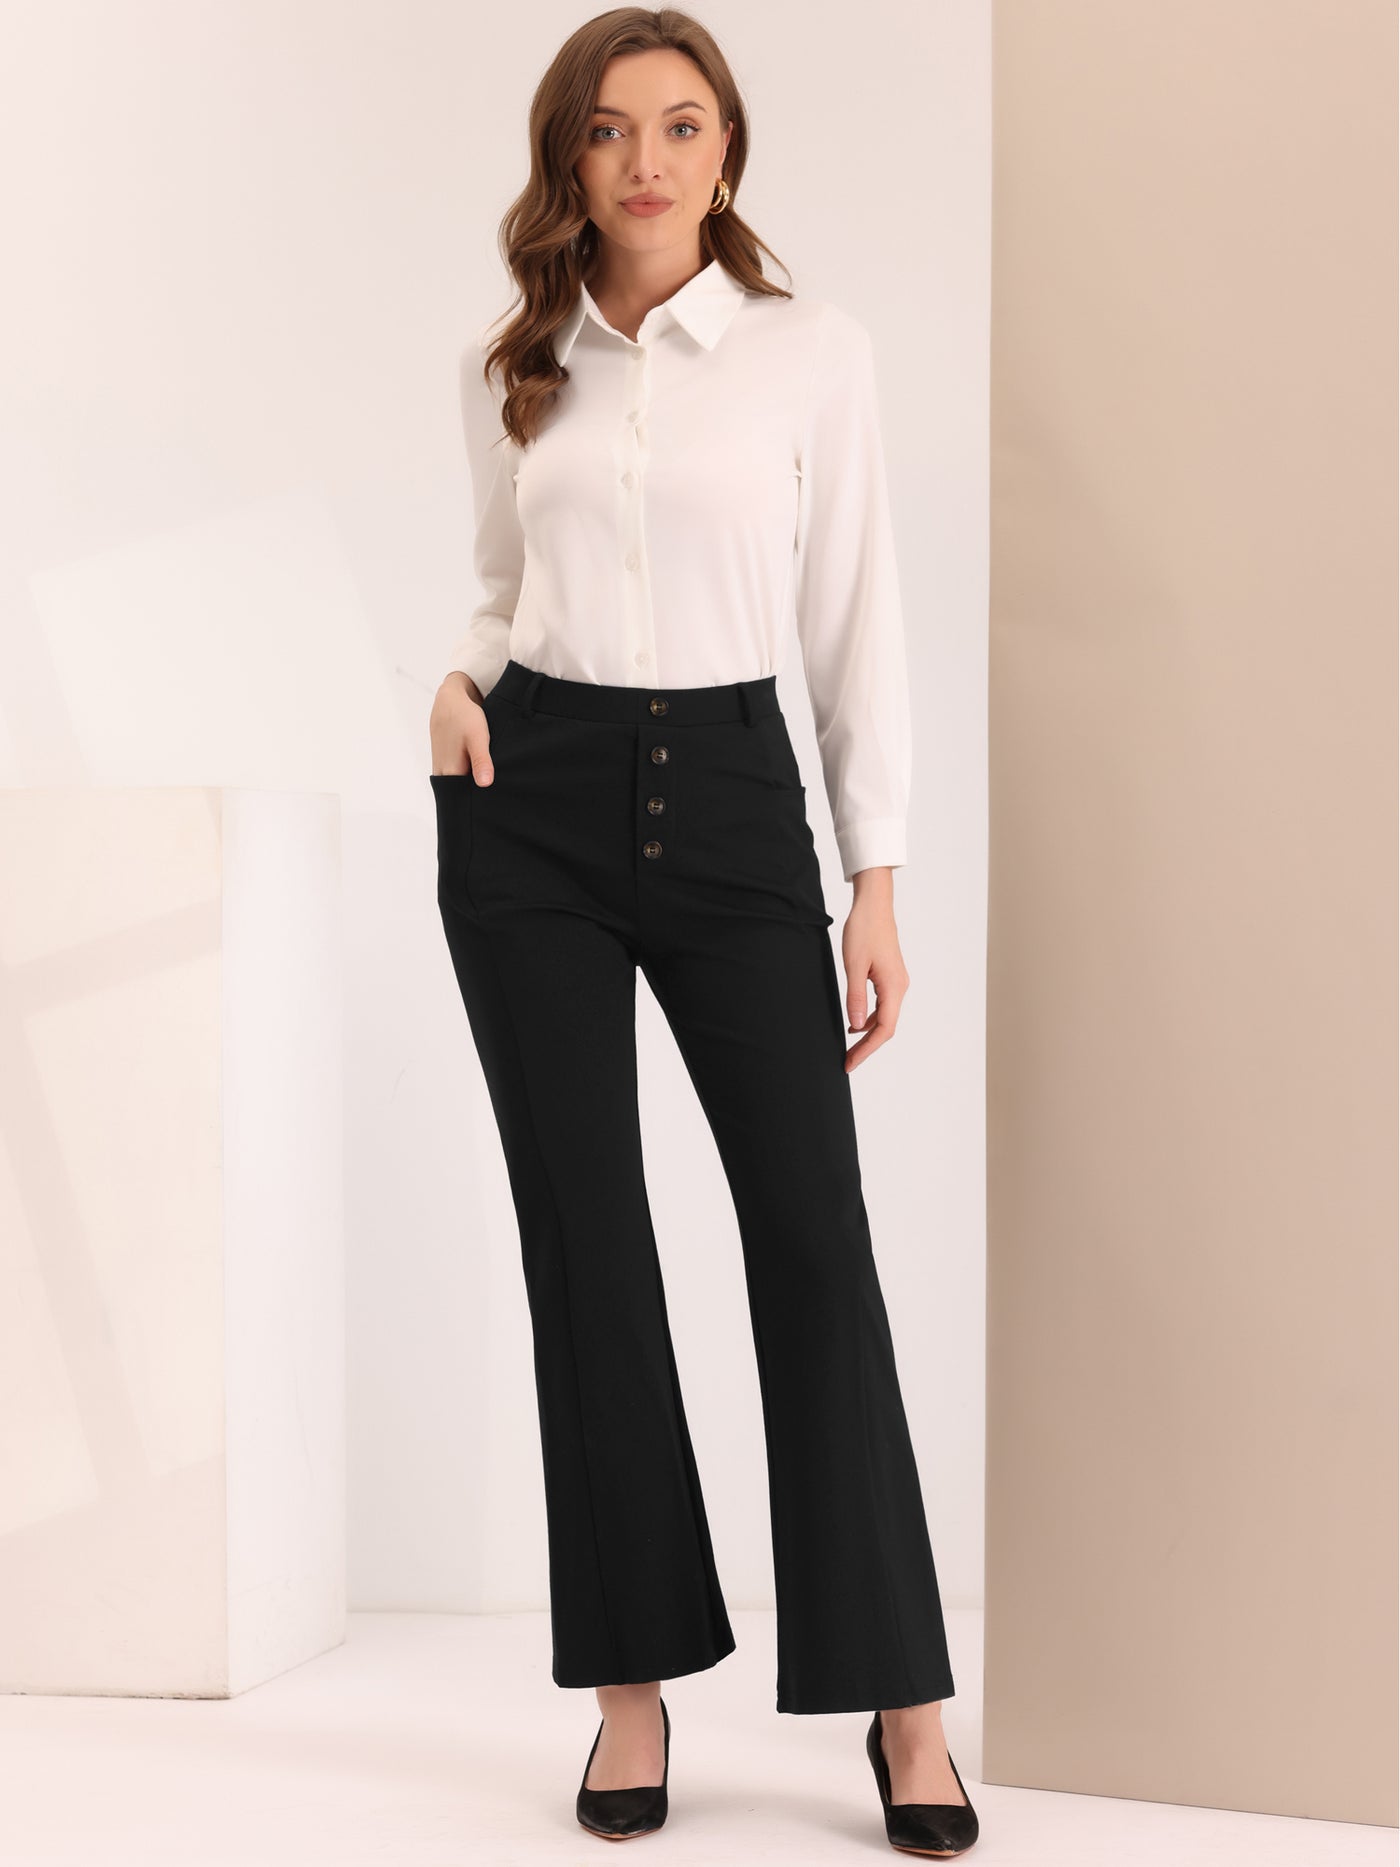 Belt Loops Stretchy Bootcut Dress Pants for Women's High Waist Work Office  Business Casual Slacks with Pockets